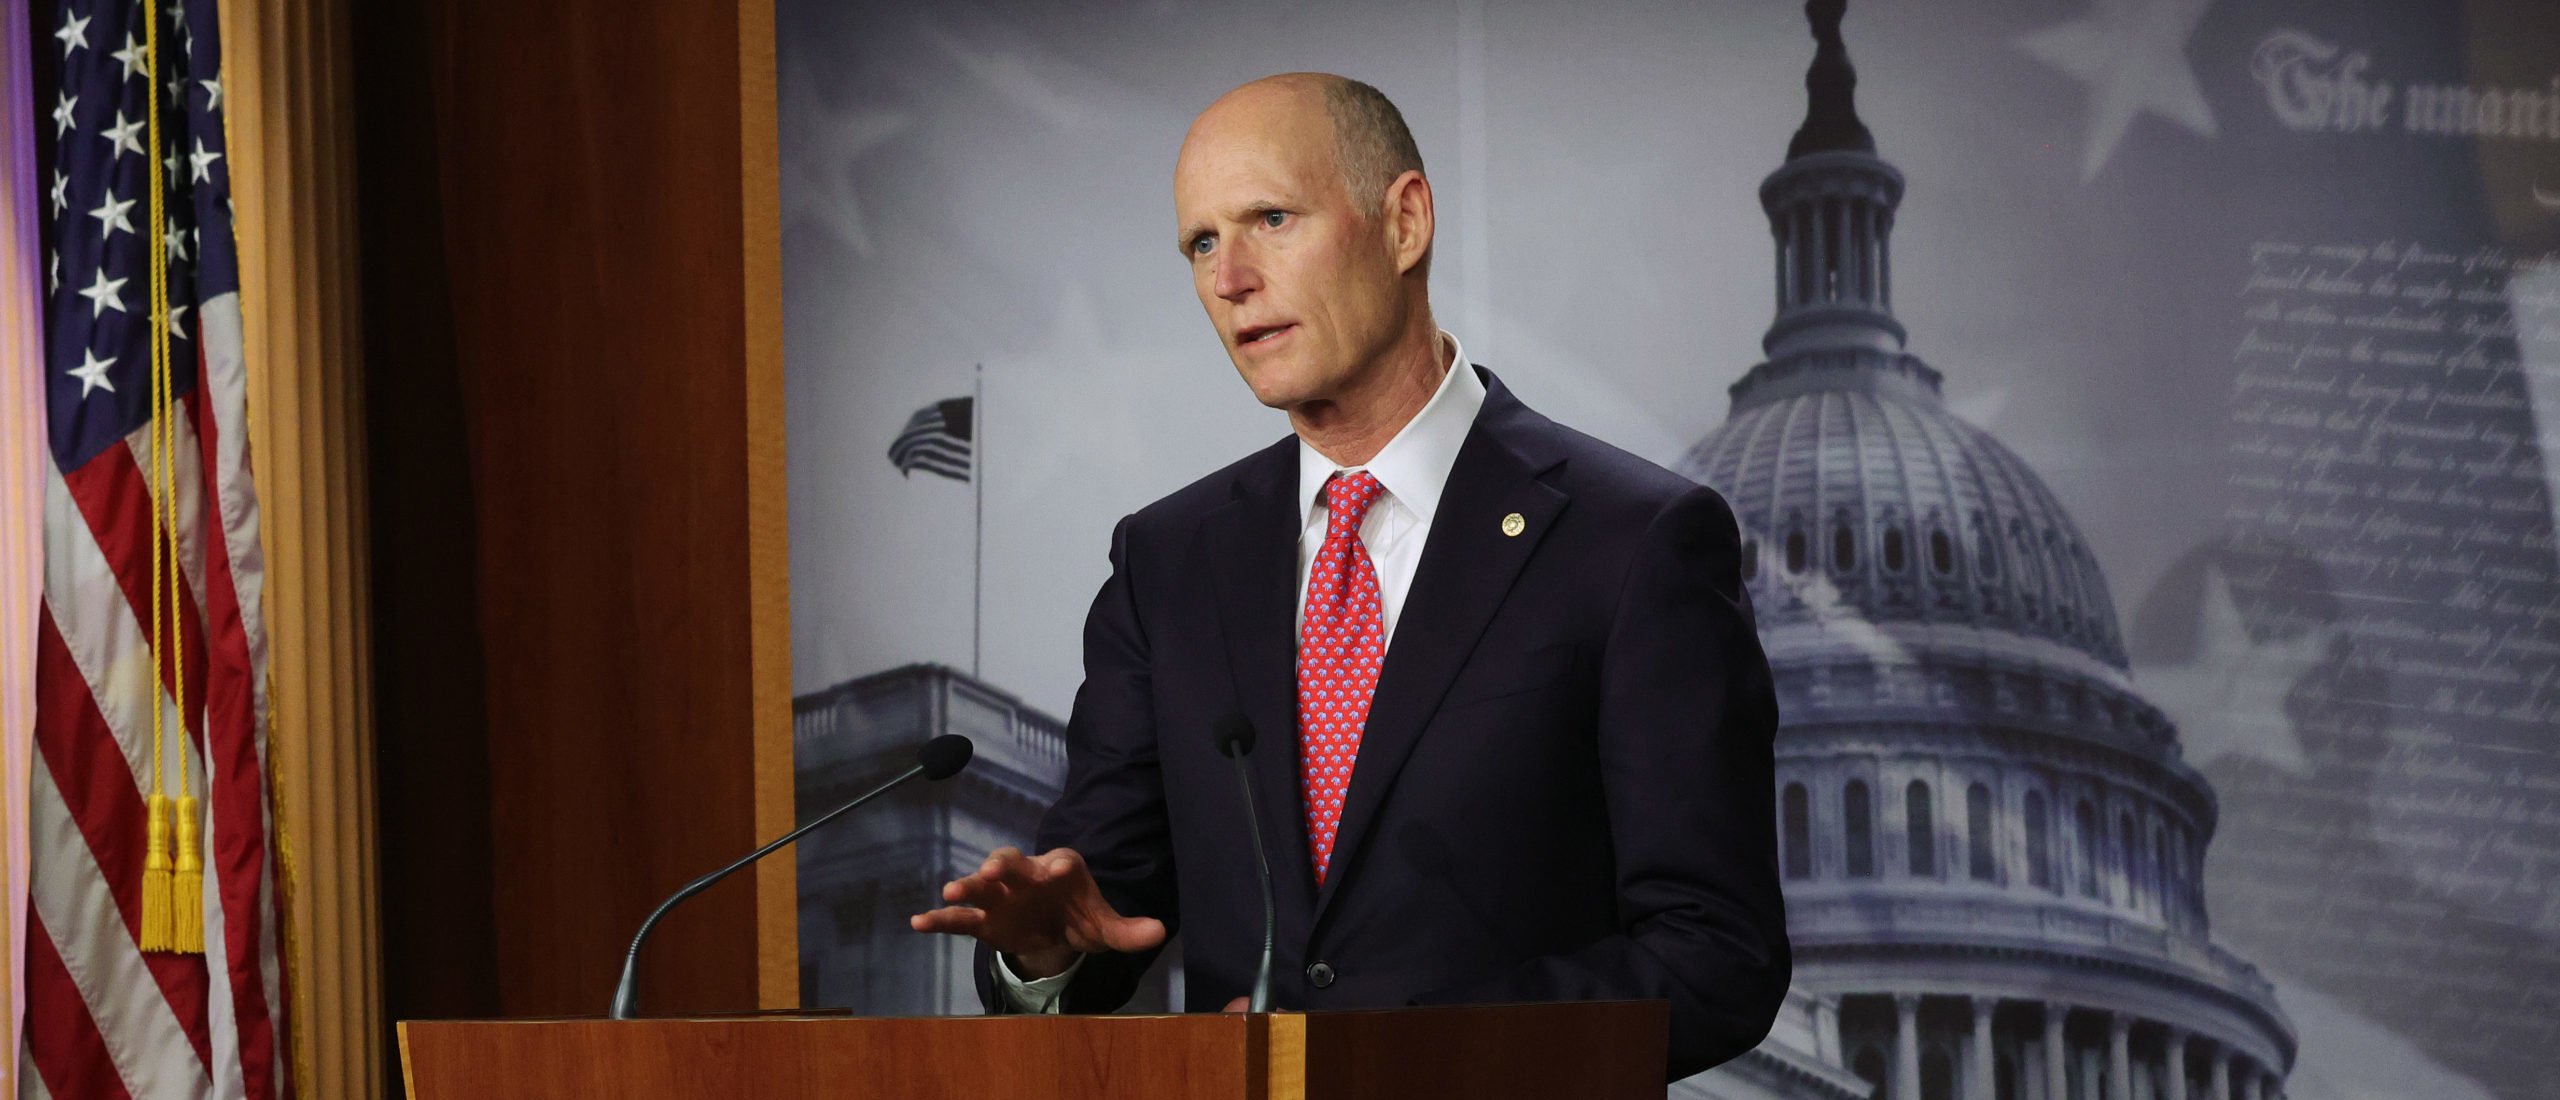 WASHINGTON, DC - MARCH 05: U.S. Sen. Rick Scott (R-FL) speaks during a news conference at the U.S. Capitol on March 5, 2021 in Washington, DC. The Senate continues to debate the latest COVID-19 relief bill. (Photo by Alex Wong/Getty Images)